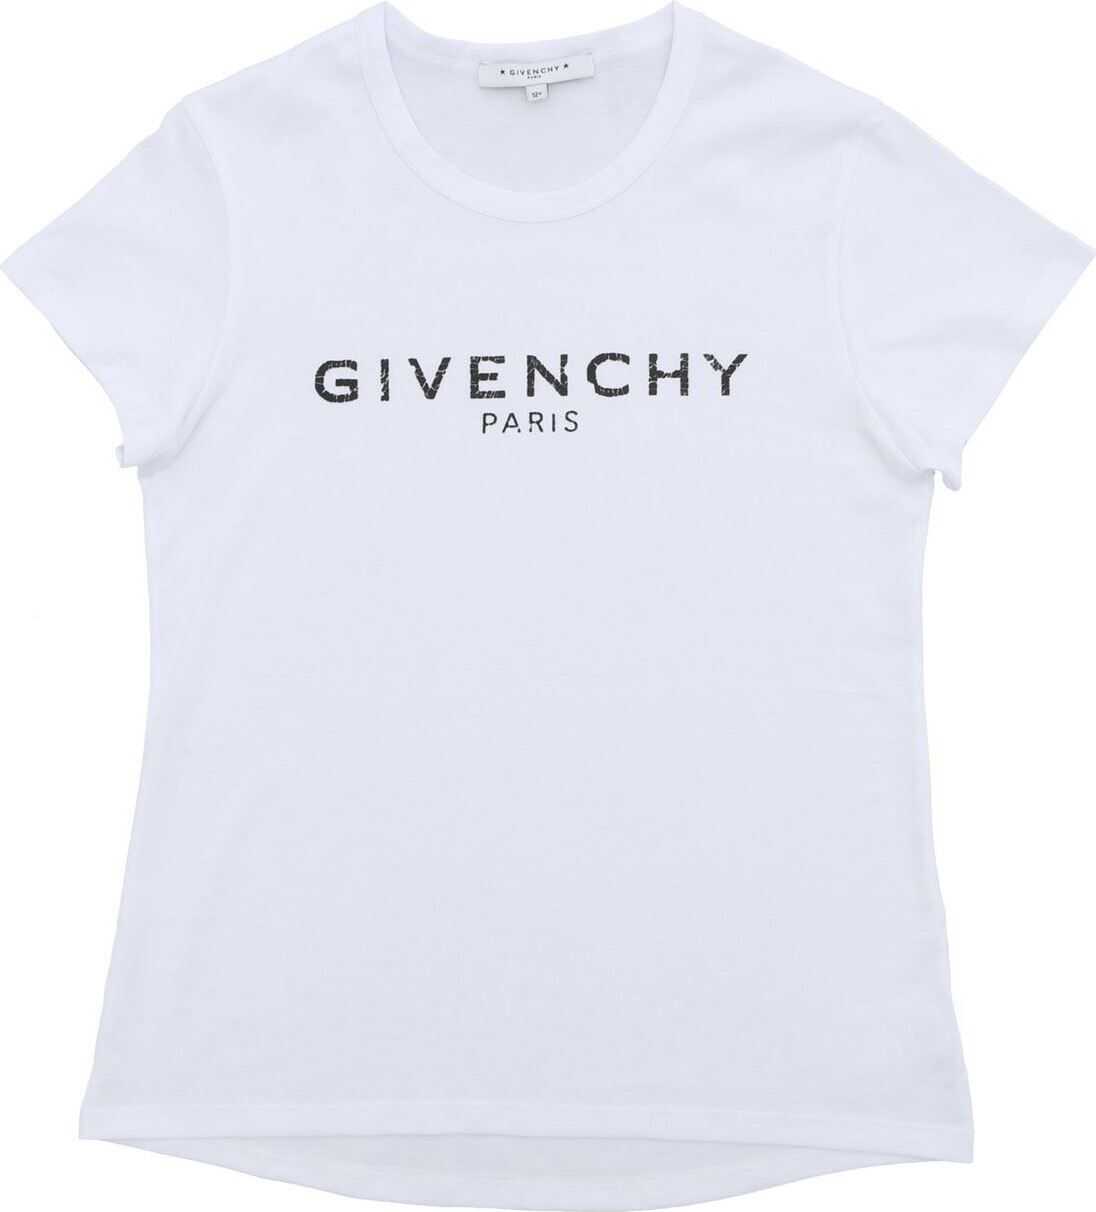 Givenchy Givenchy Printed T-Shirt In White White